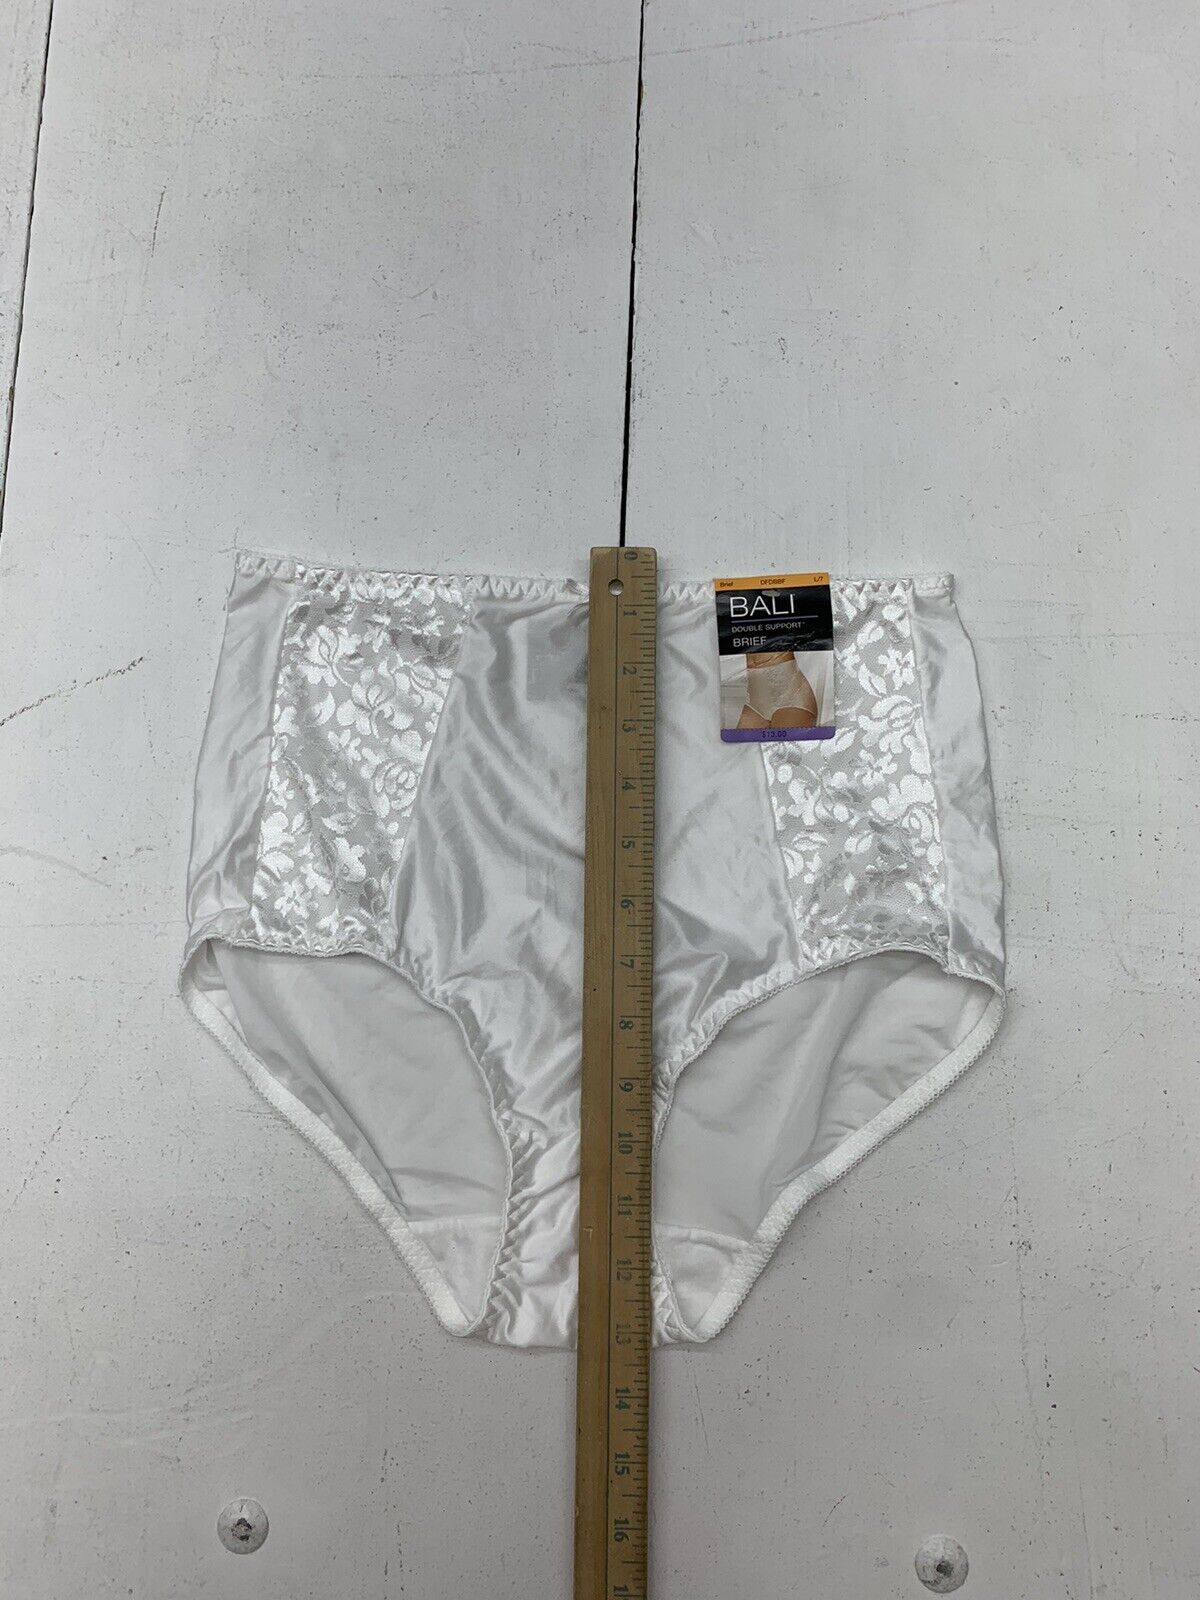 Bali Womens Double Support White Briefs Size Large - beyond exchange